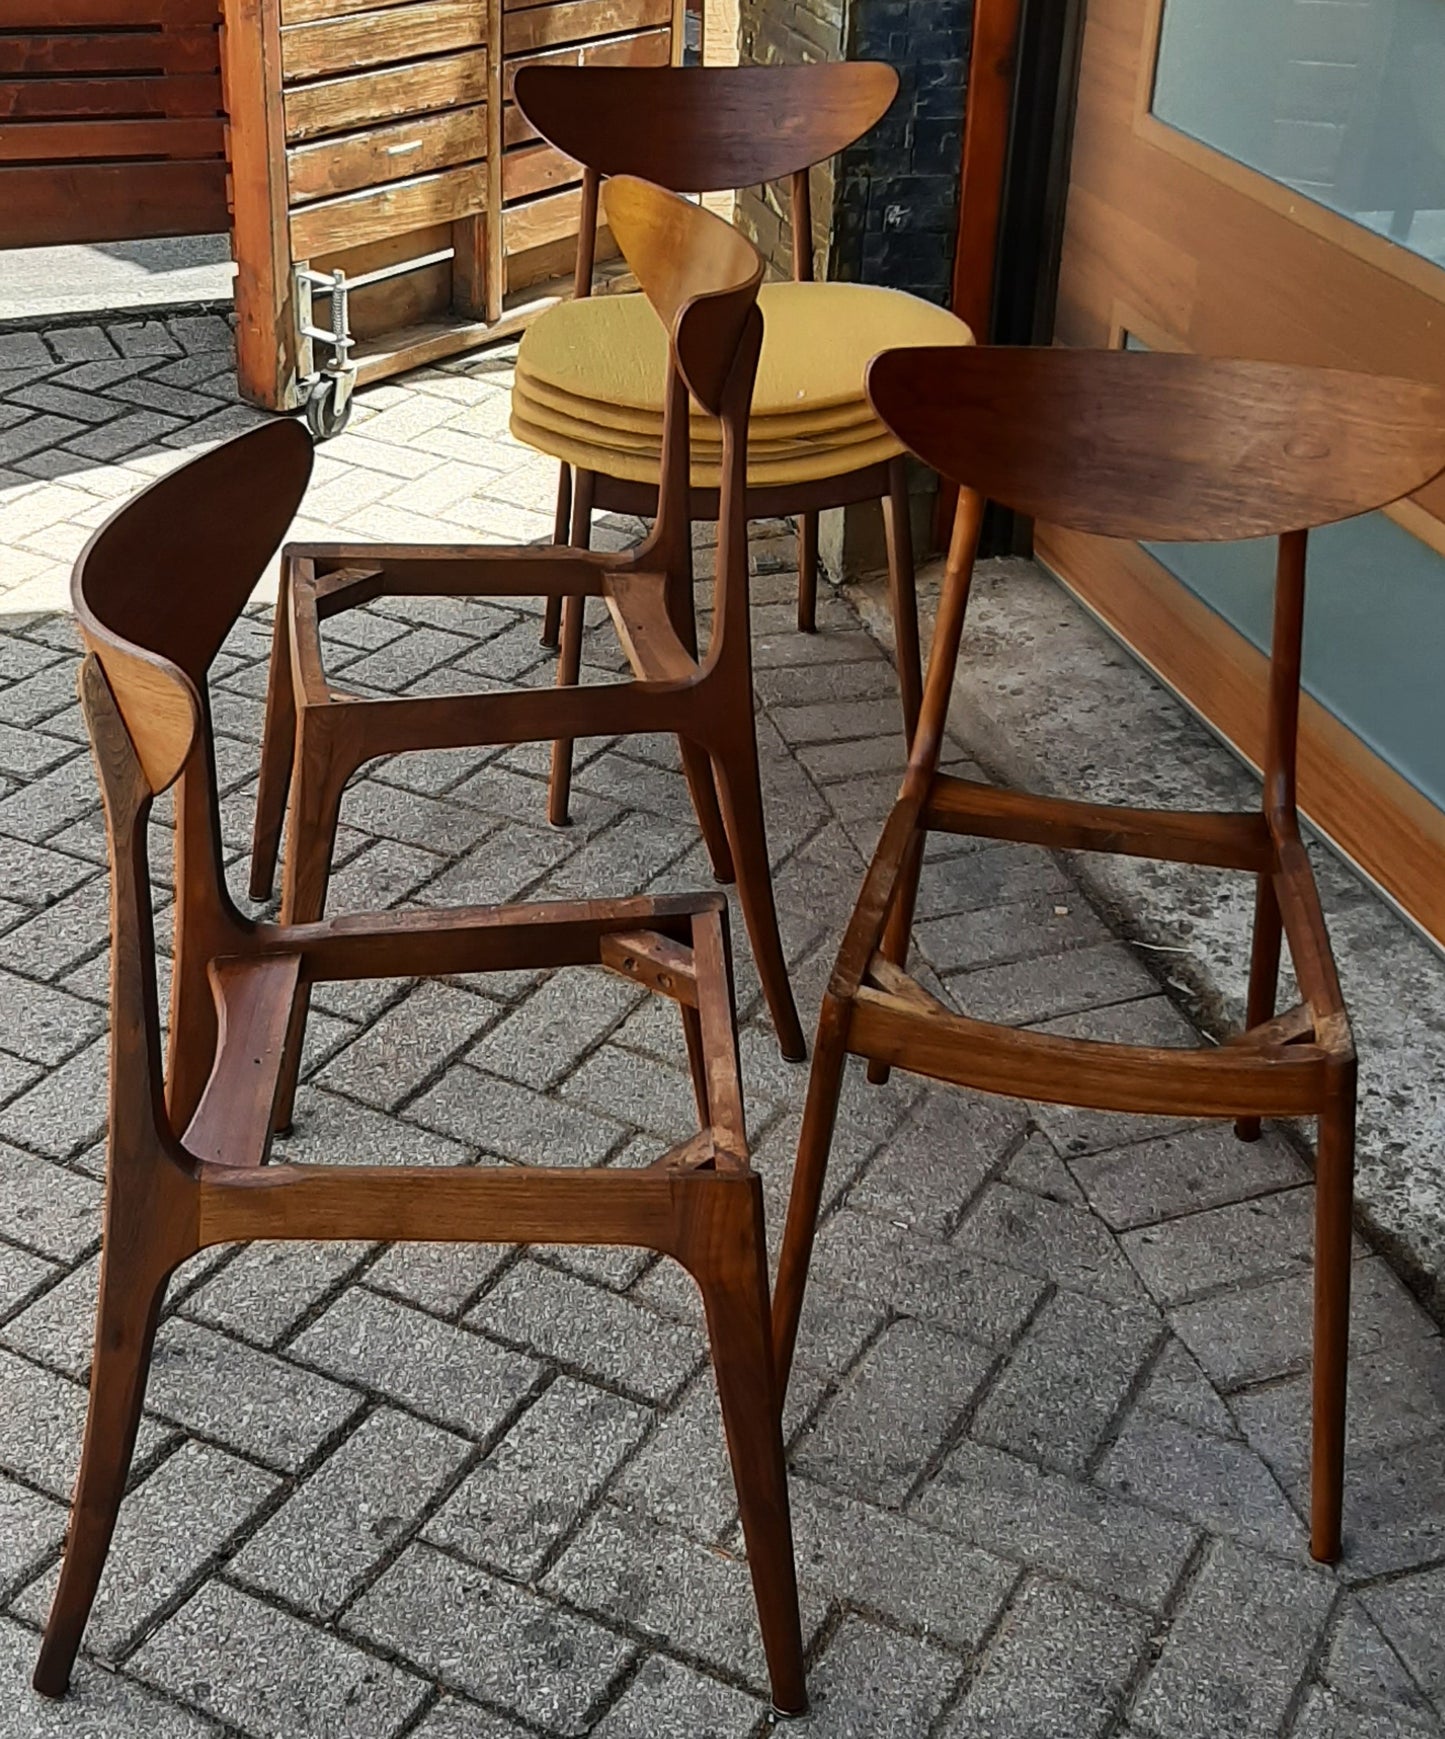 4 REFINISHED Mid Century Modern Walnut Chairs will be REUPHOLSTERED